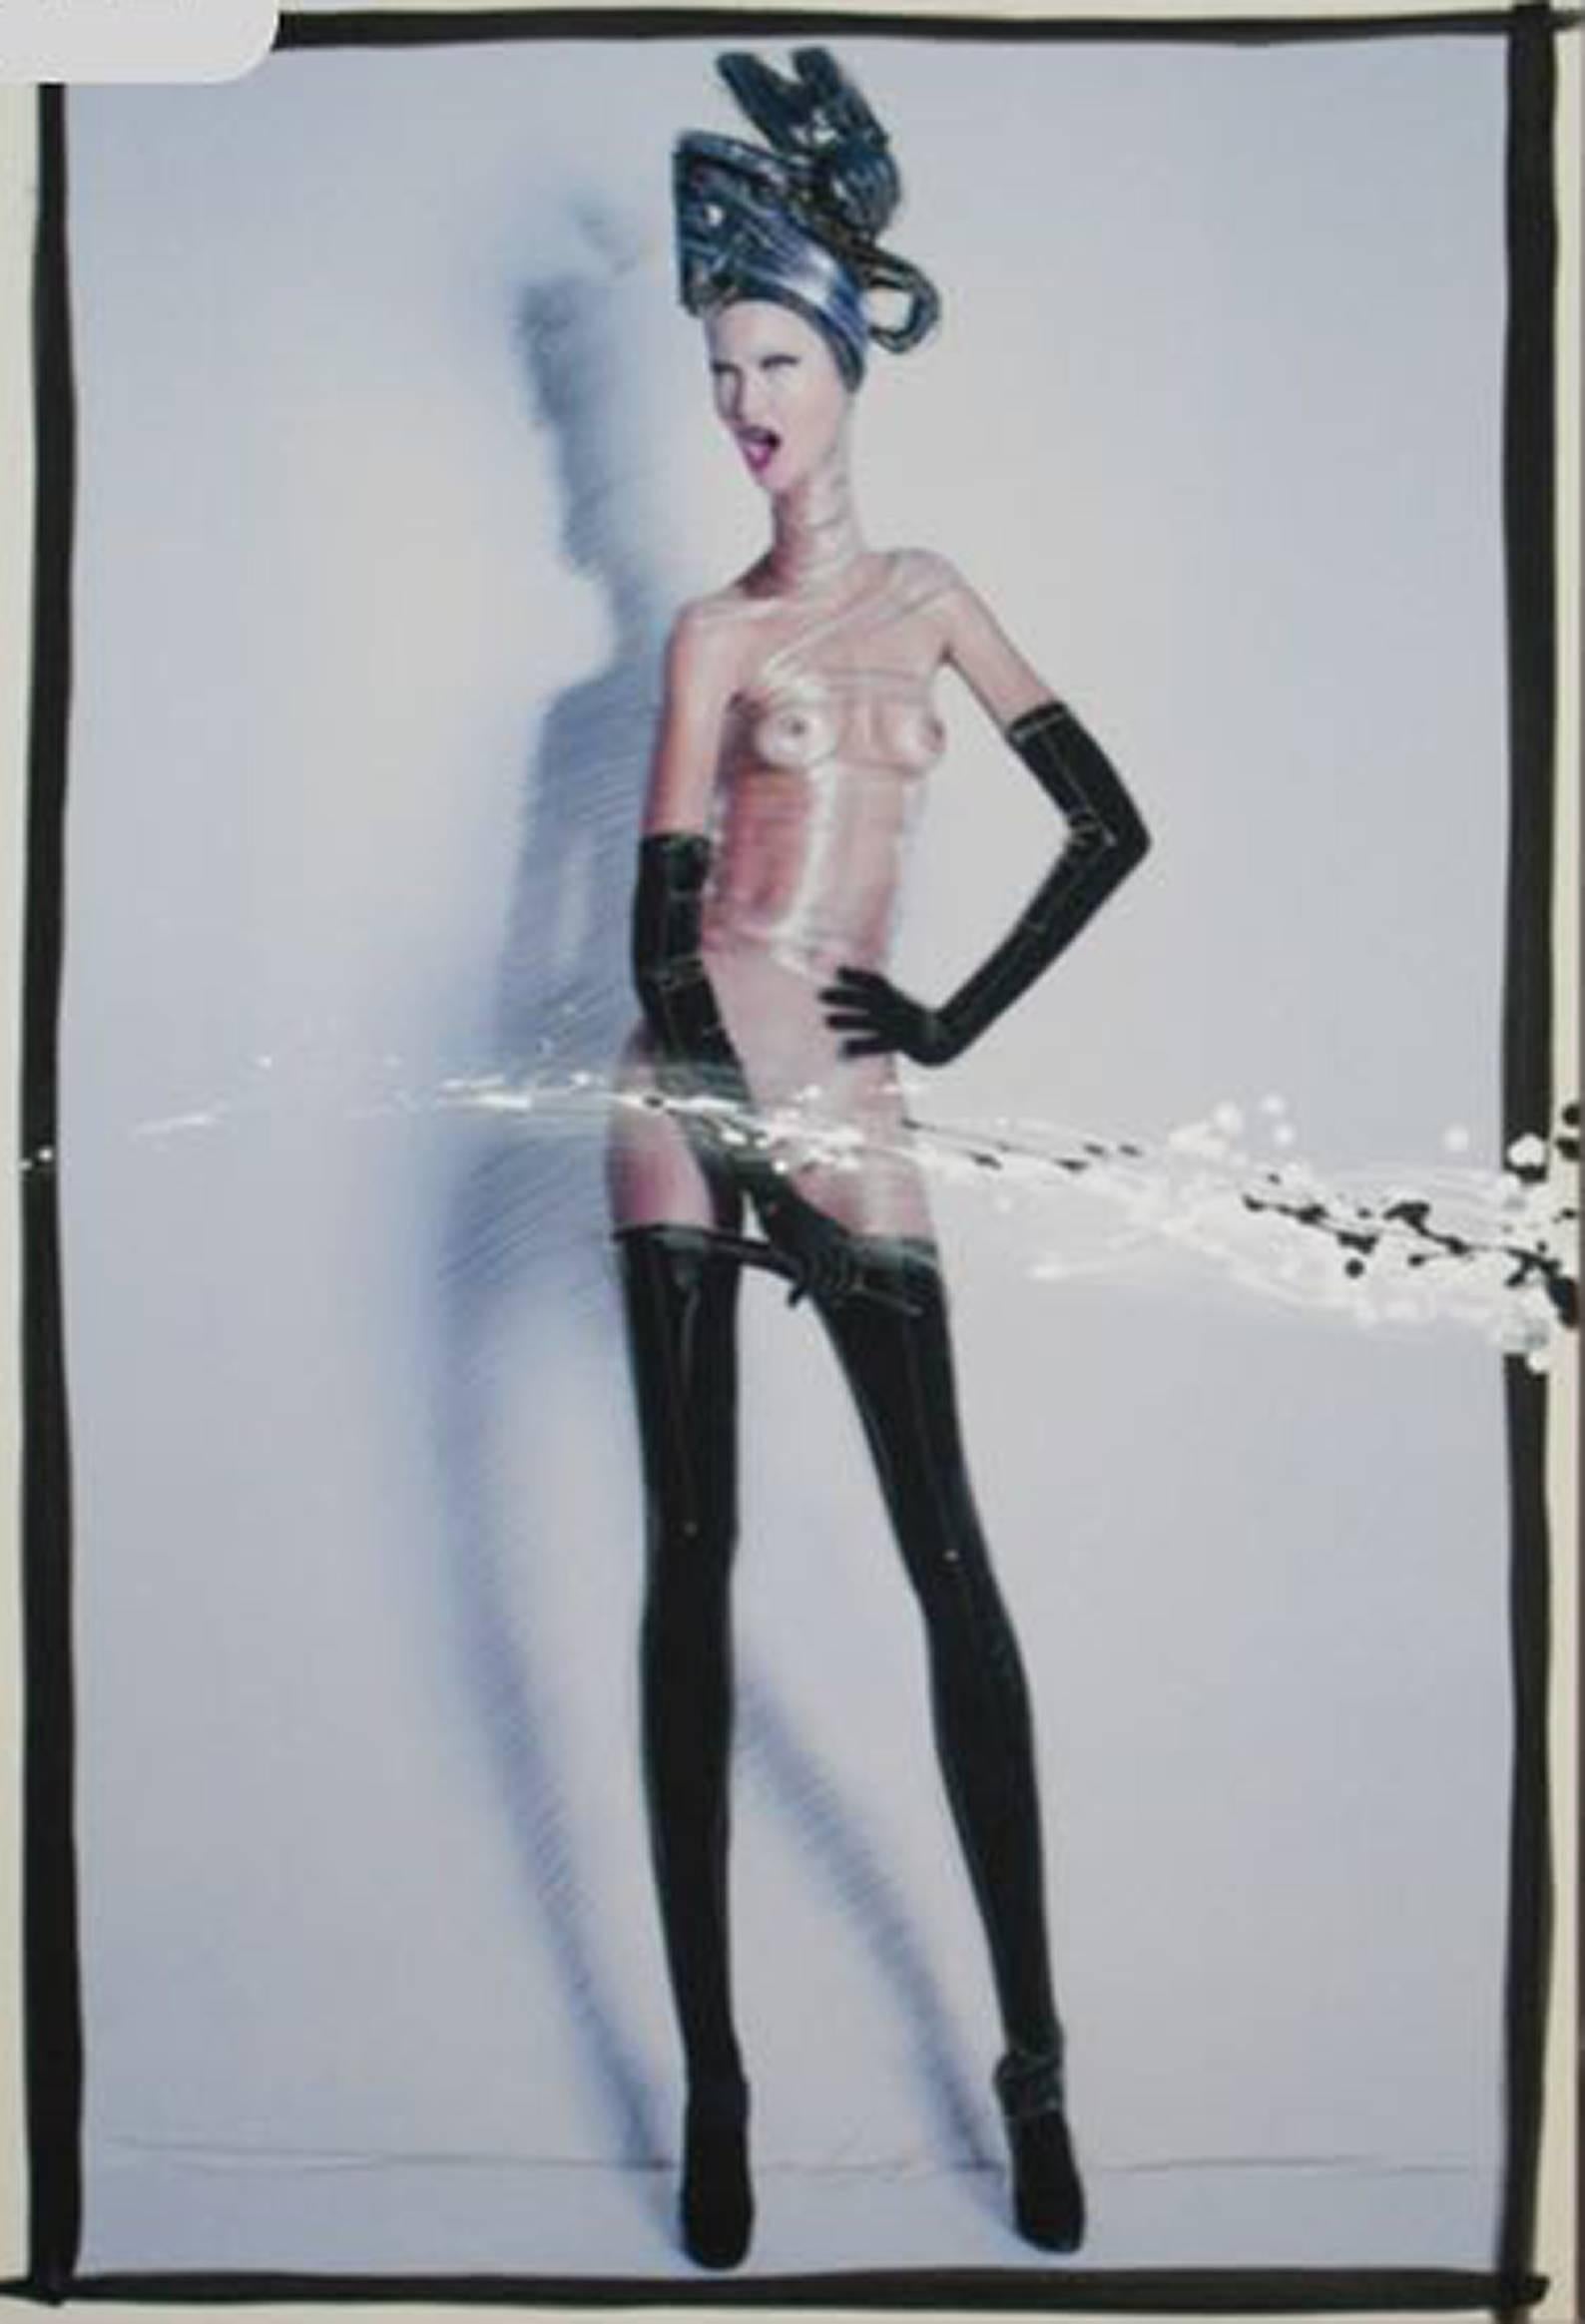 Nude Girl Hips with Plastic and Tights Archival Pigment print mountd on aluminum - Mixed Media Art by Efren Isaza